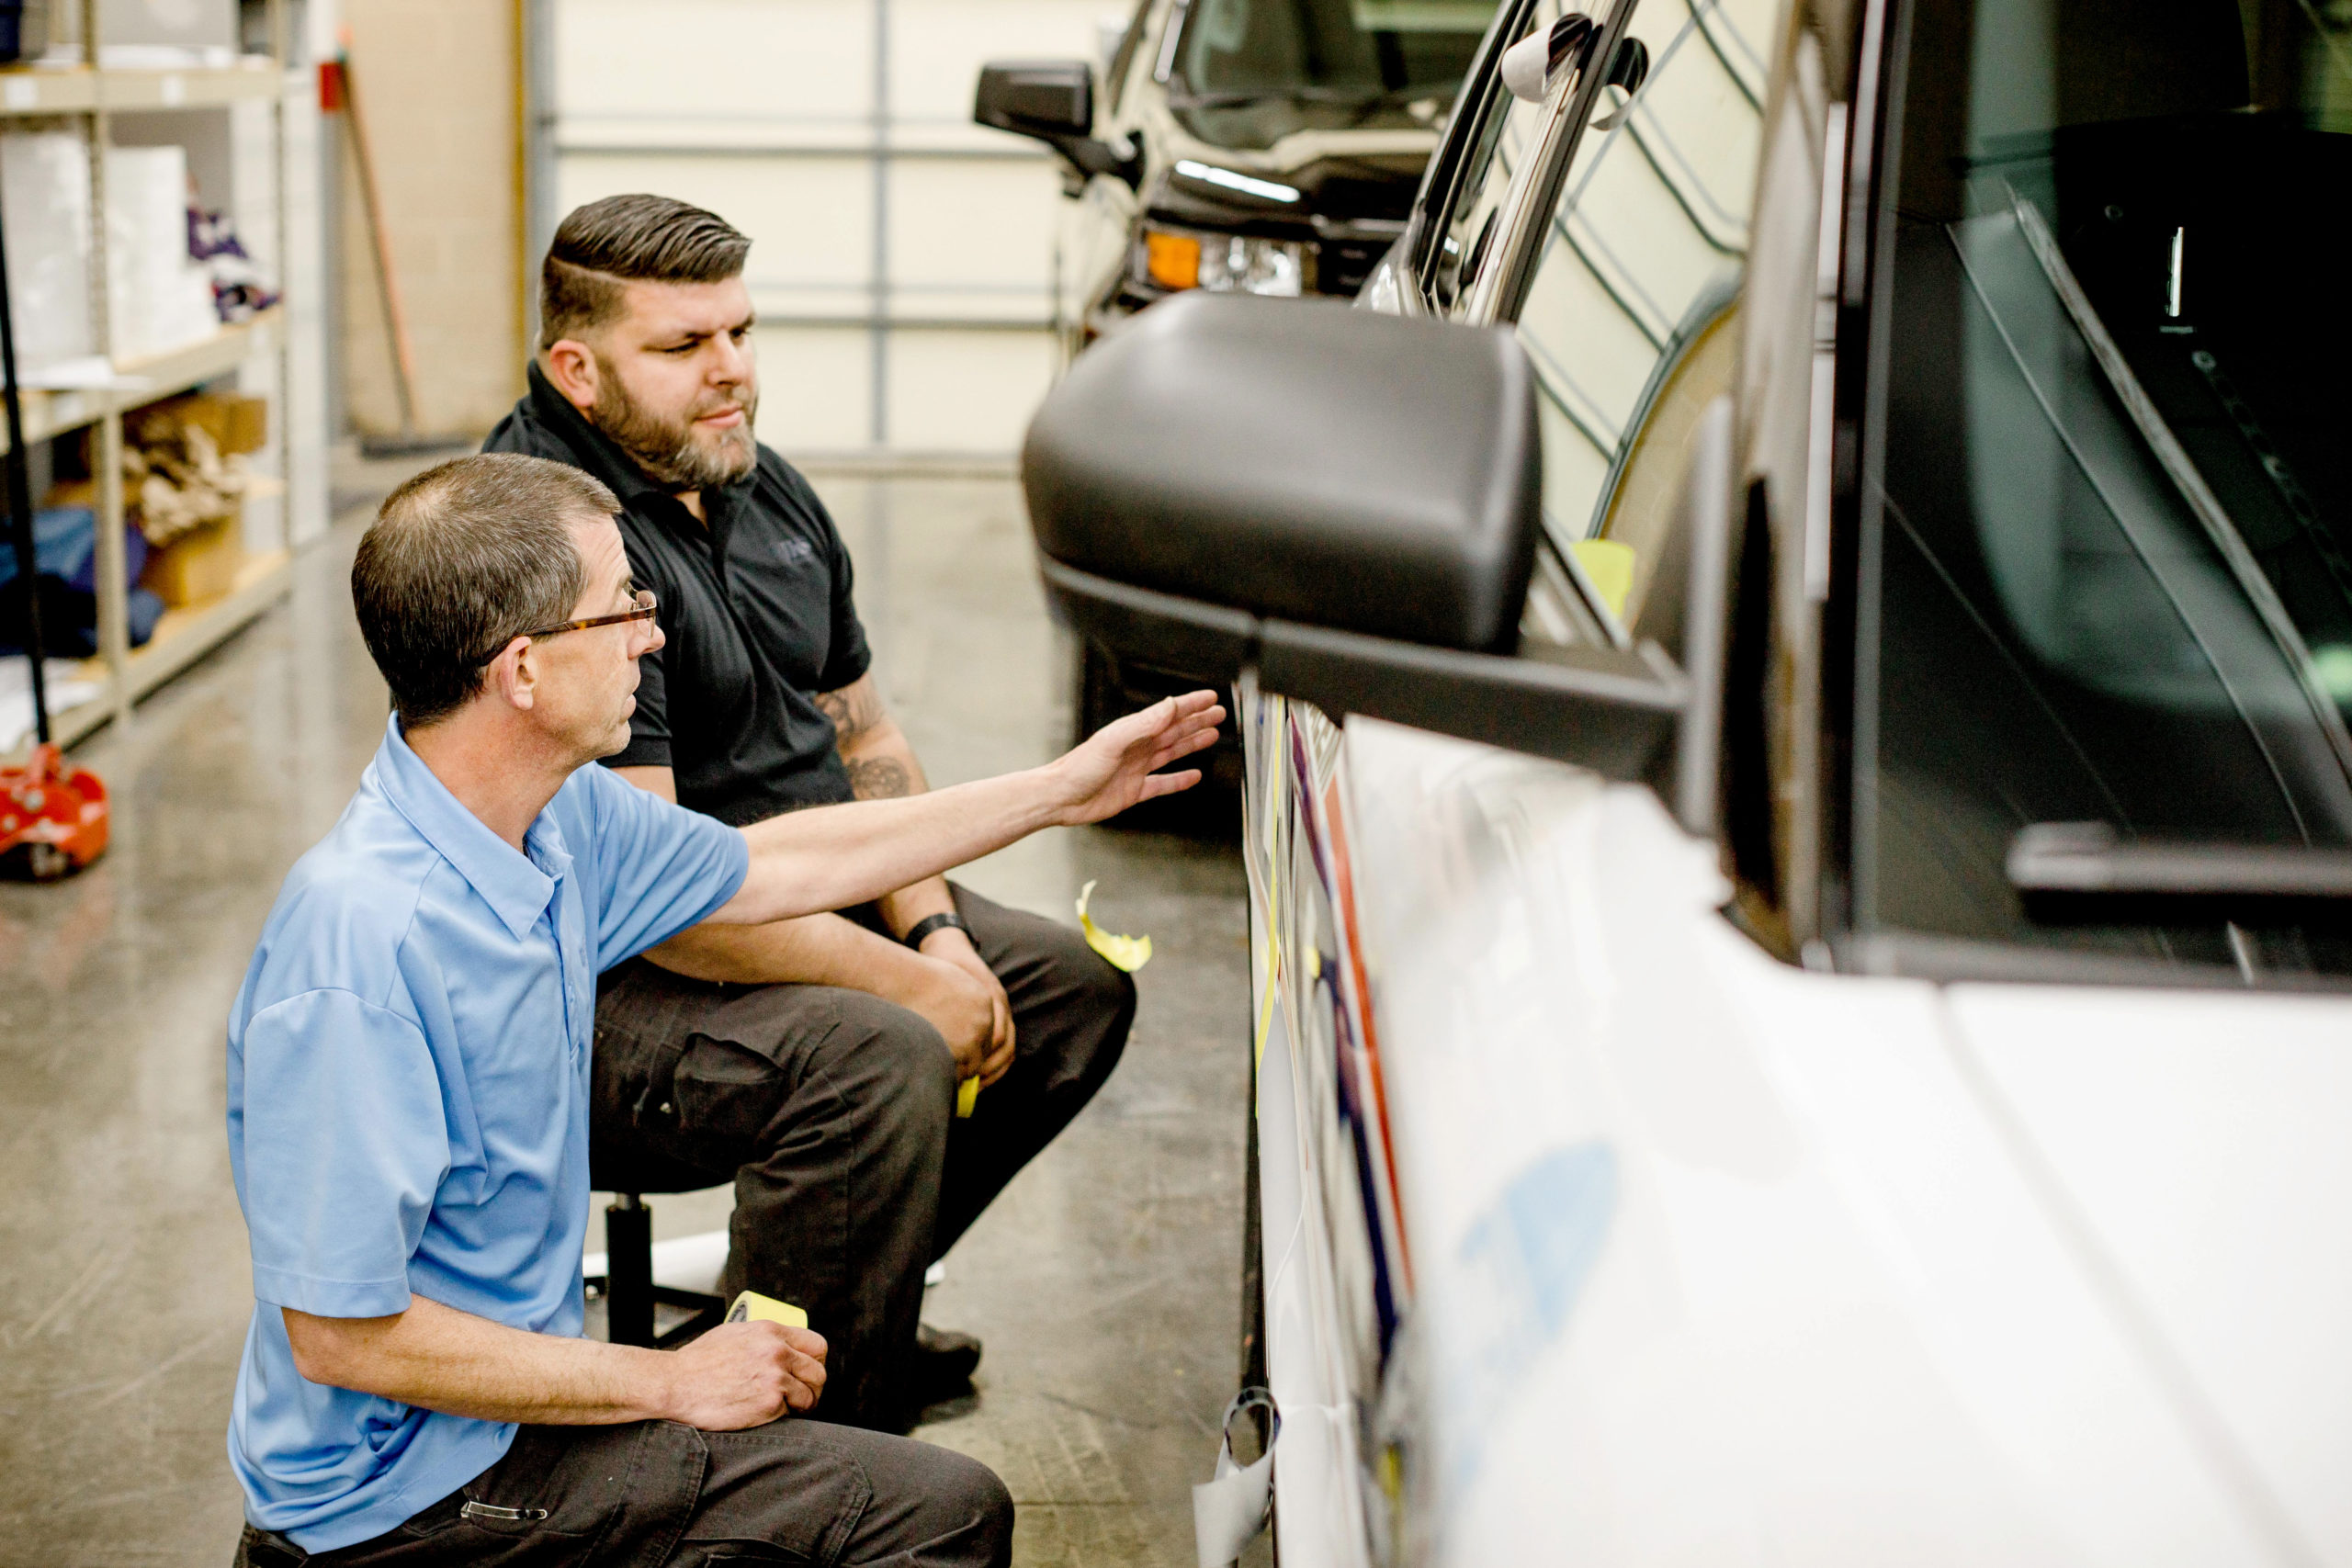 Shane and Jordan discuss the details of a vehicle graphics installation project.